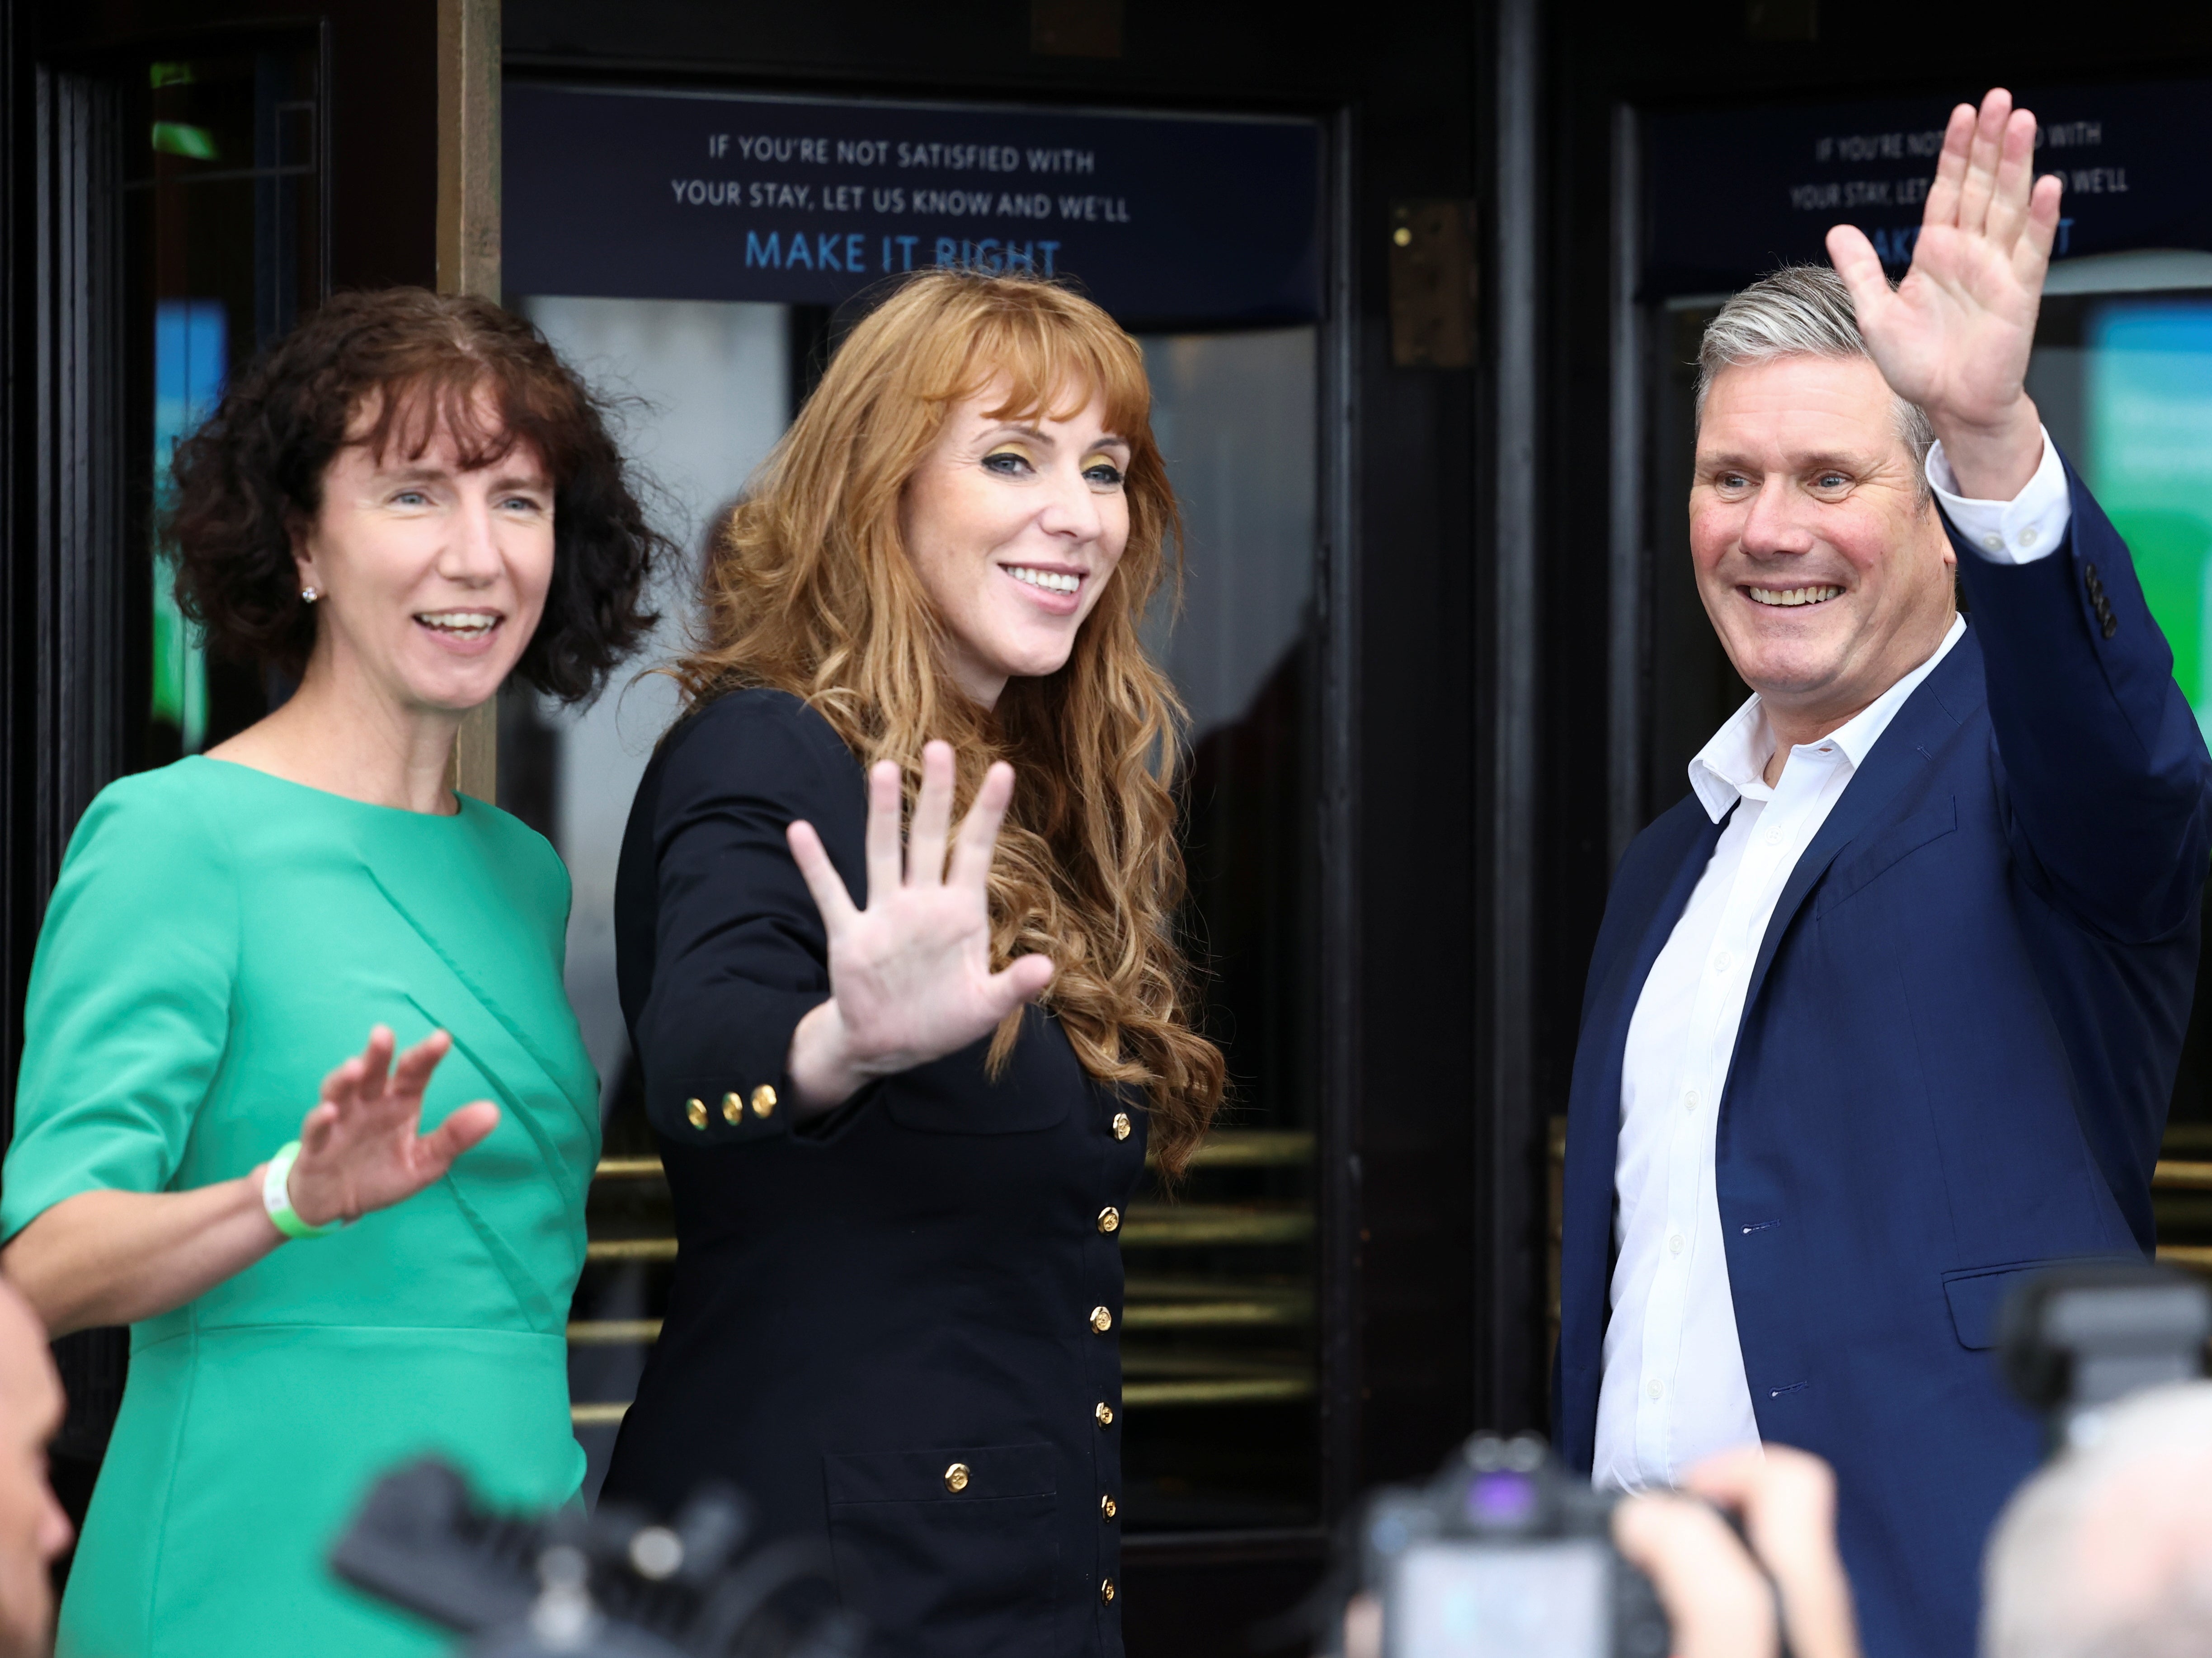 Sir Keir Starmer arrives at the Labour conference in Brighton with Anneliese Dodds, left, and Angela Rayner